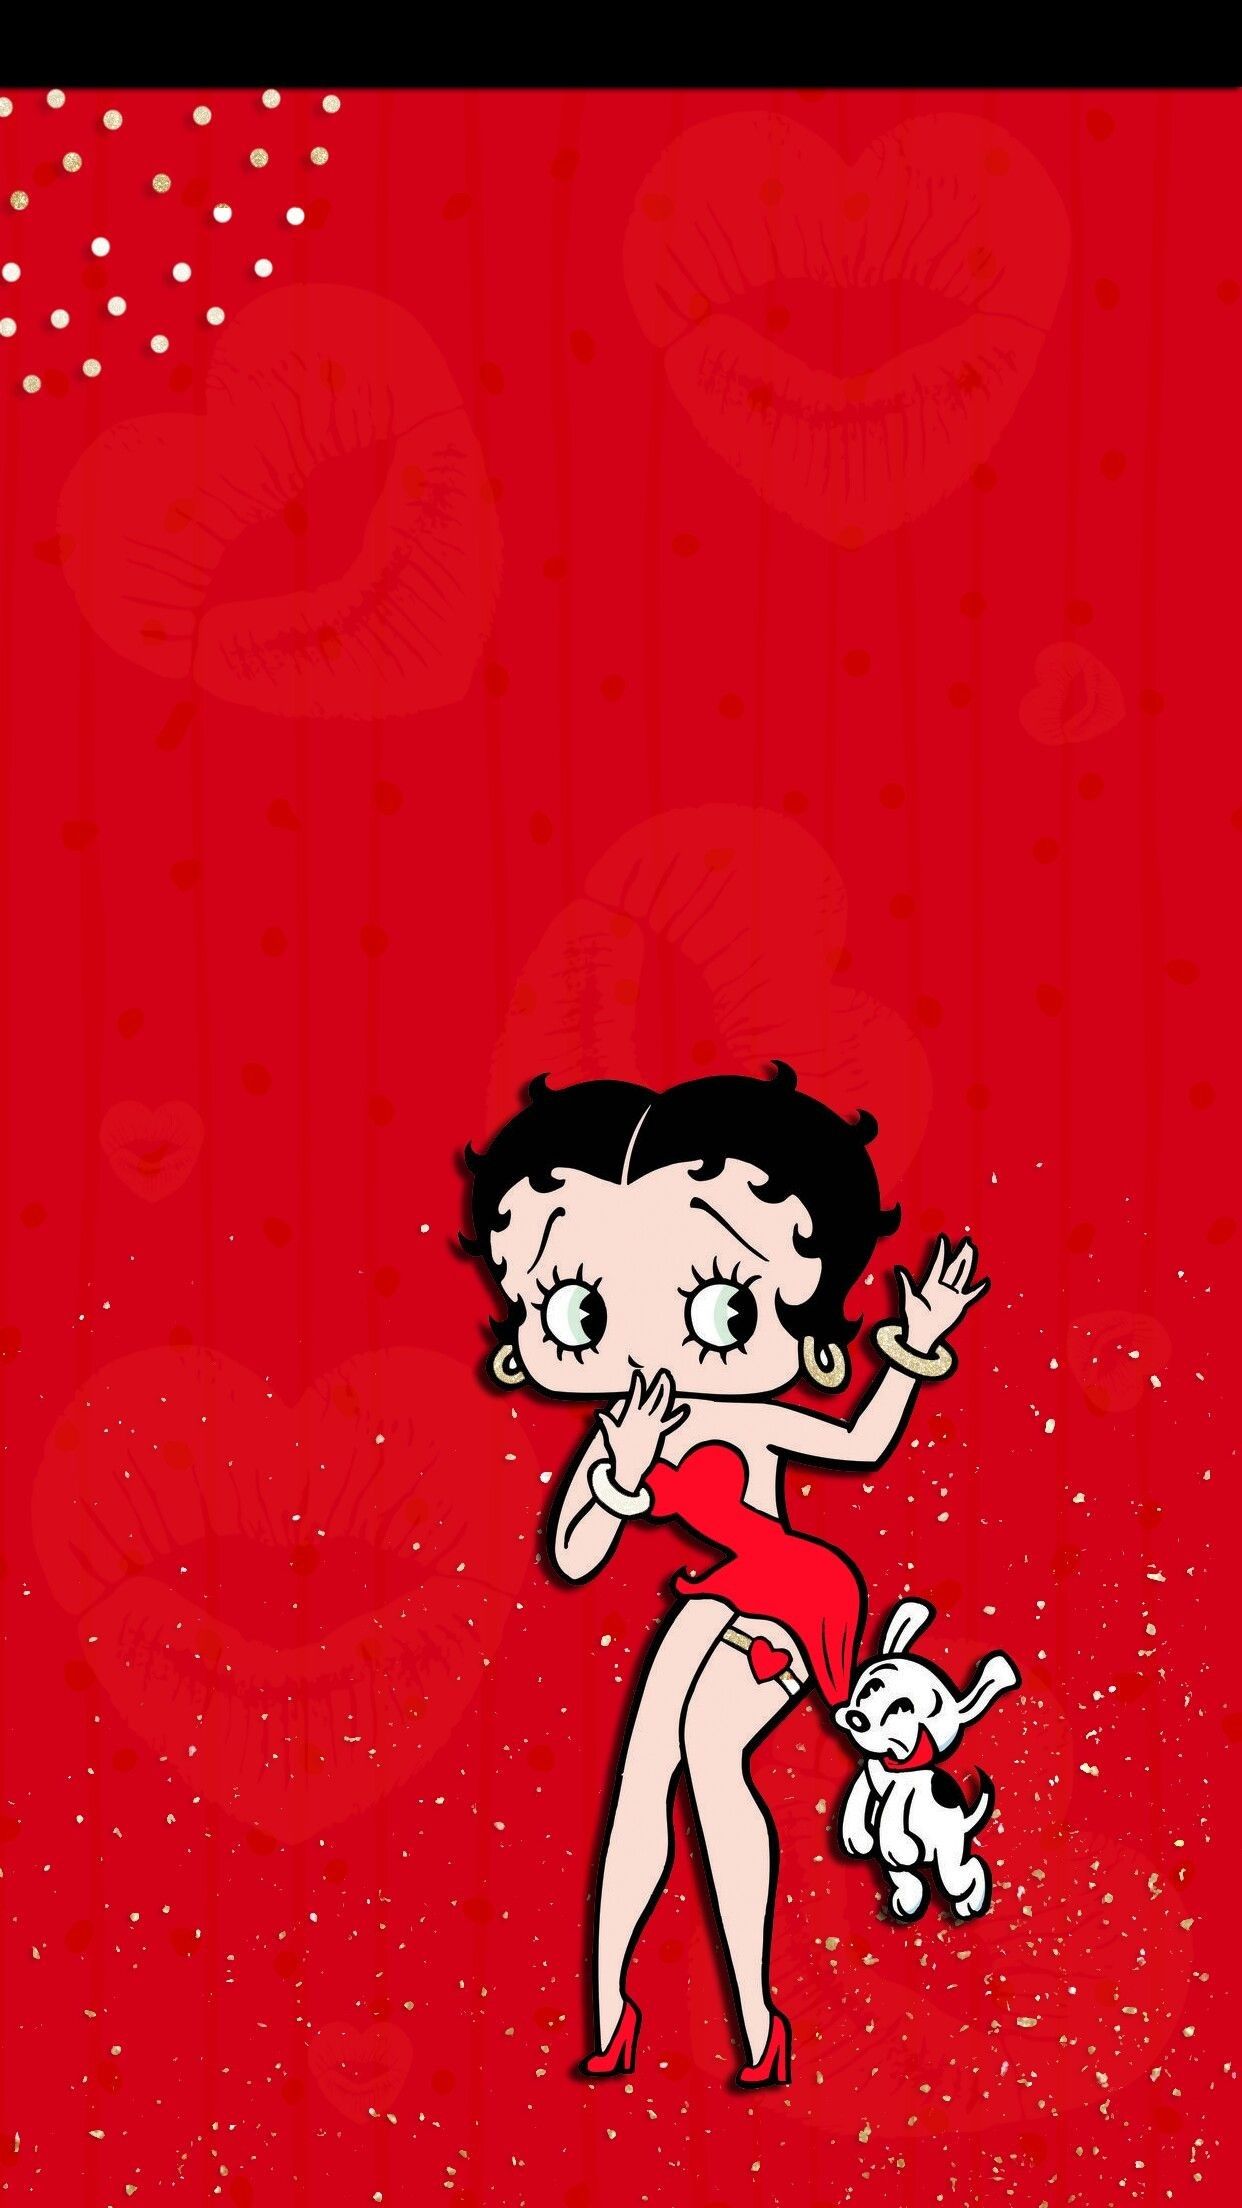 Betty Boop HD Wallpapers 50 pictures